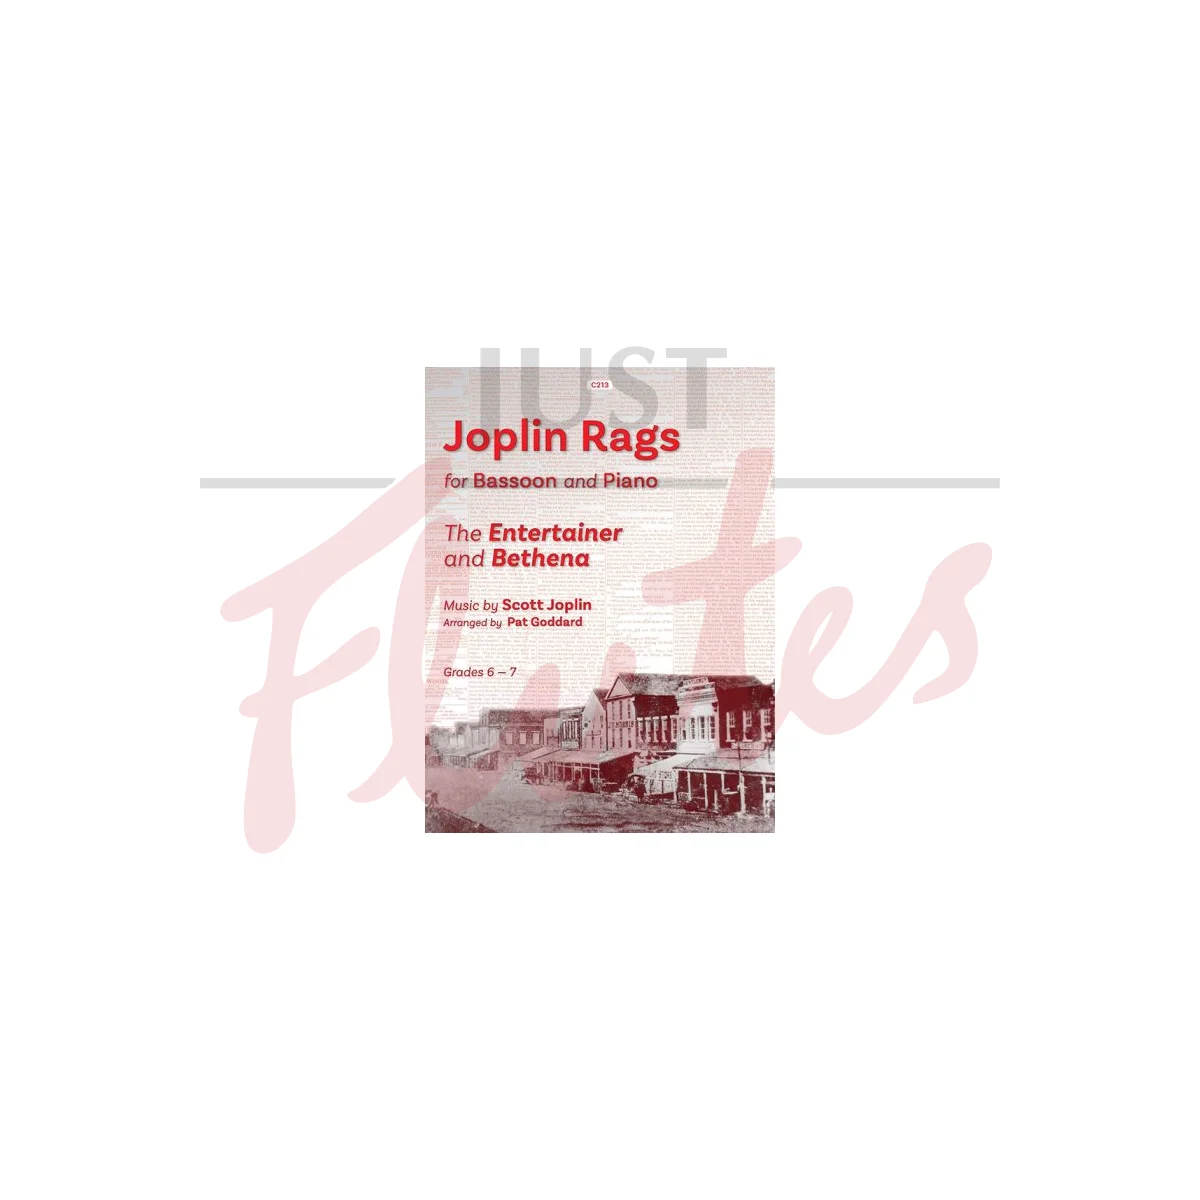 Joplin Rags for Bassoon and Piano